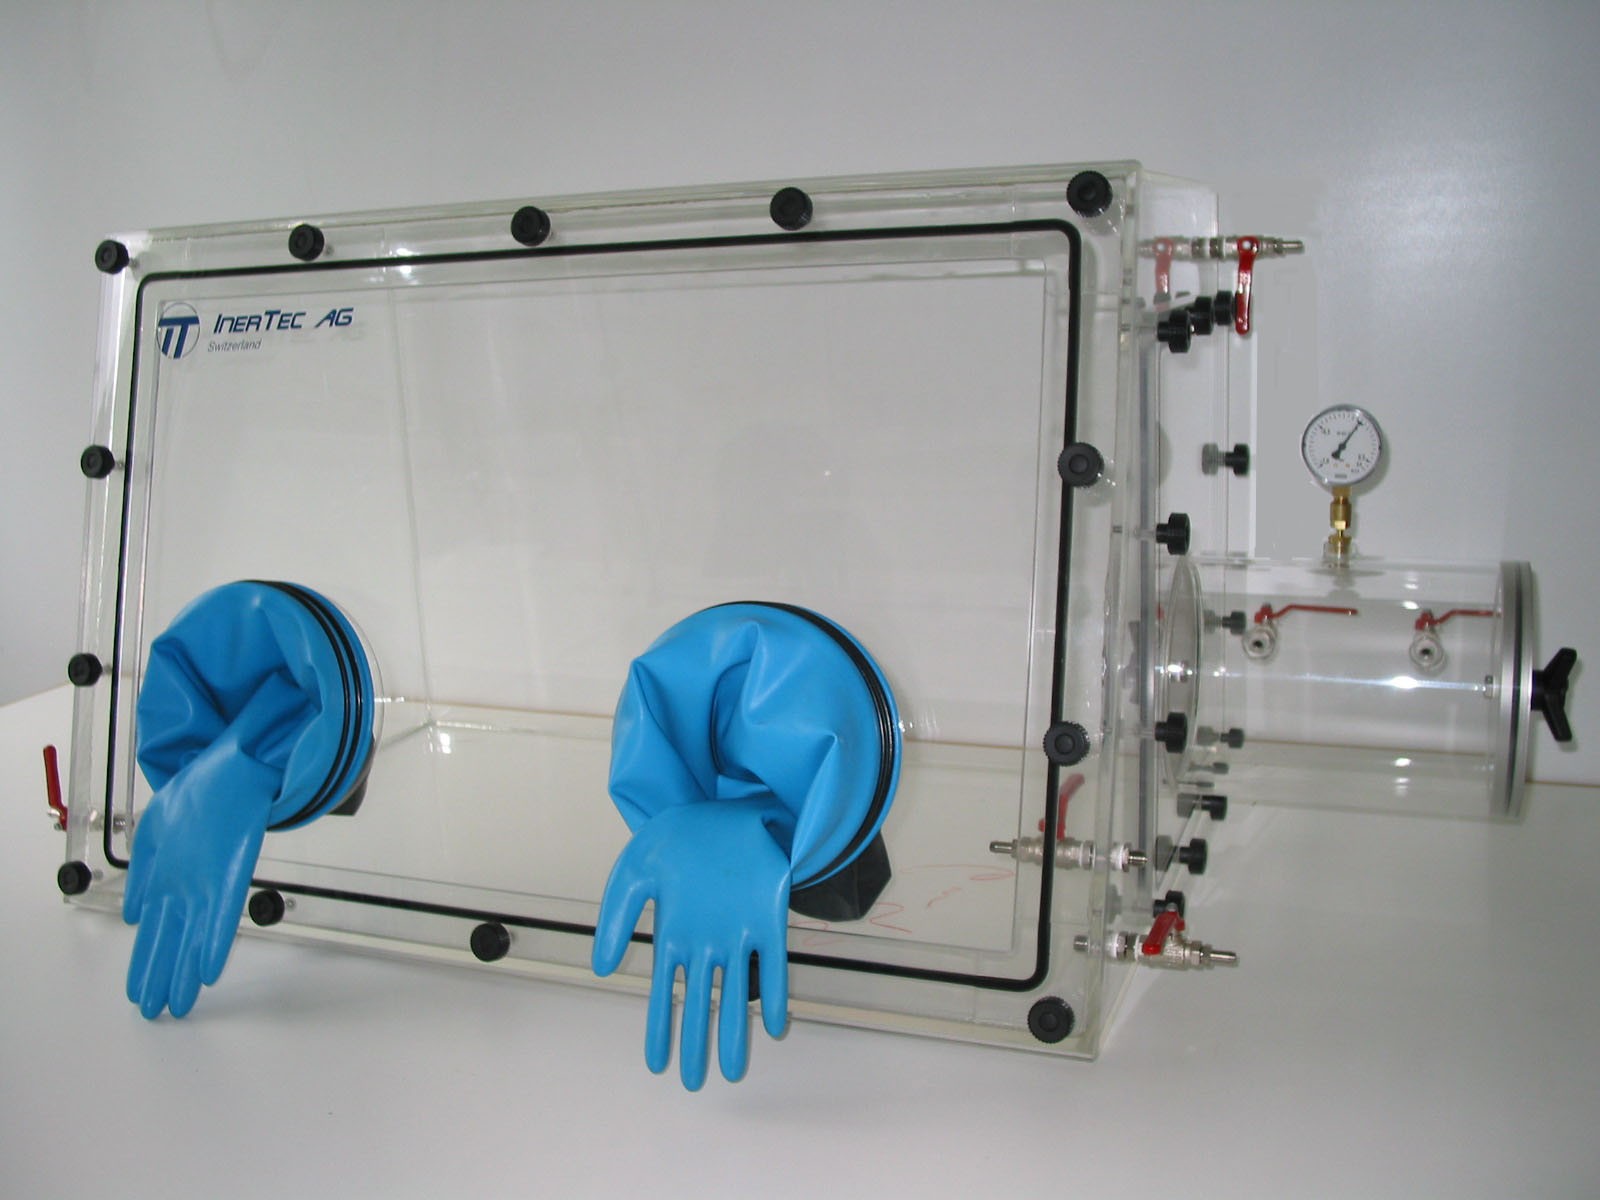 Glovebox made of acrylic&gt; Gas filling: automatic flushing with pressure control, front design: removable, side design: round vacuum lock, control: oxygen and humidity regulator